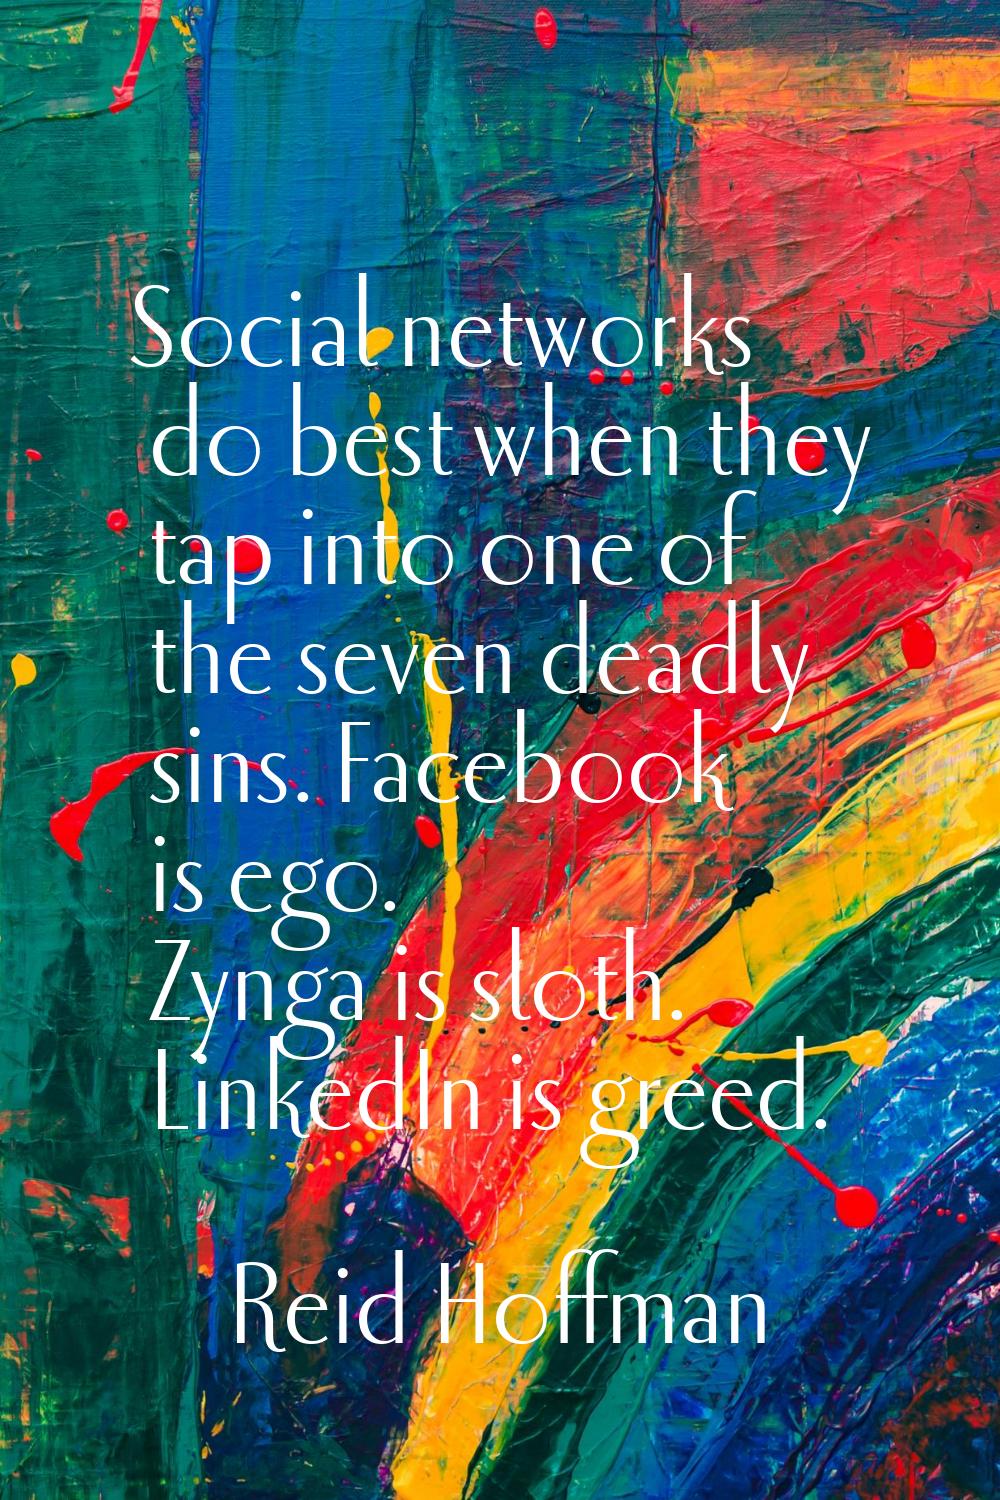 Social networks do best when they tap into one of the seven deadly sins. Facebook is ego. Zynga is 